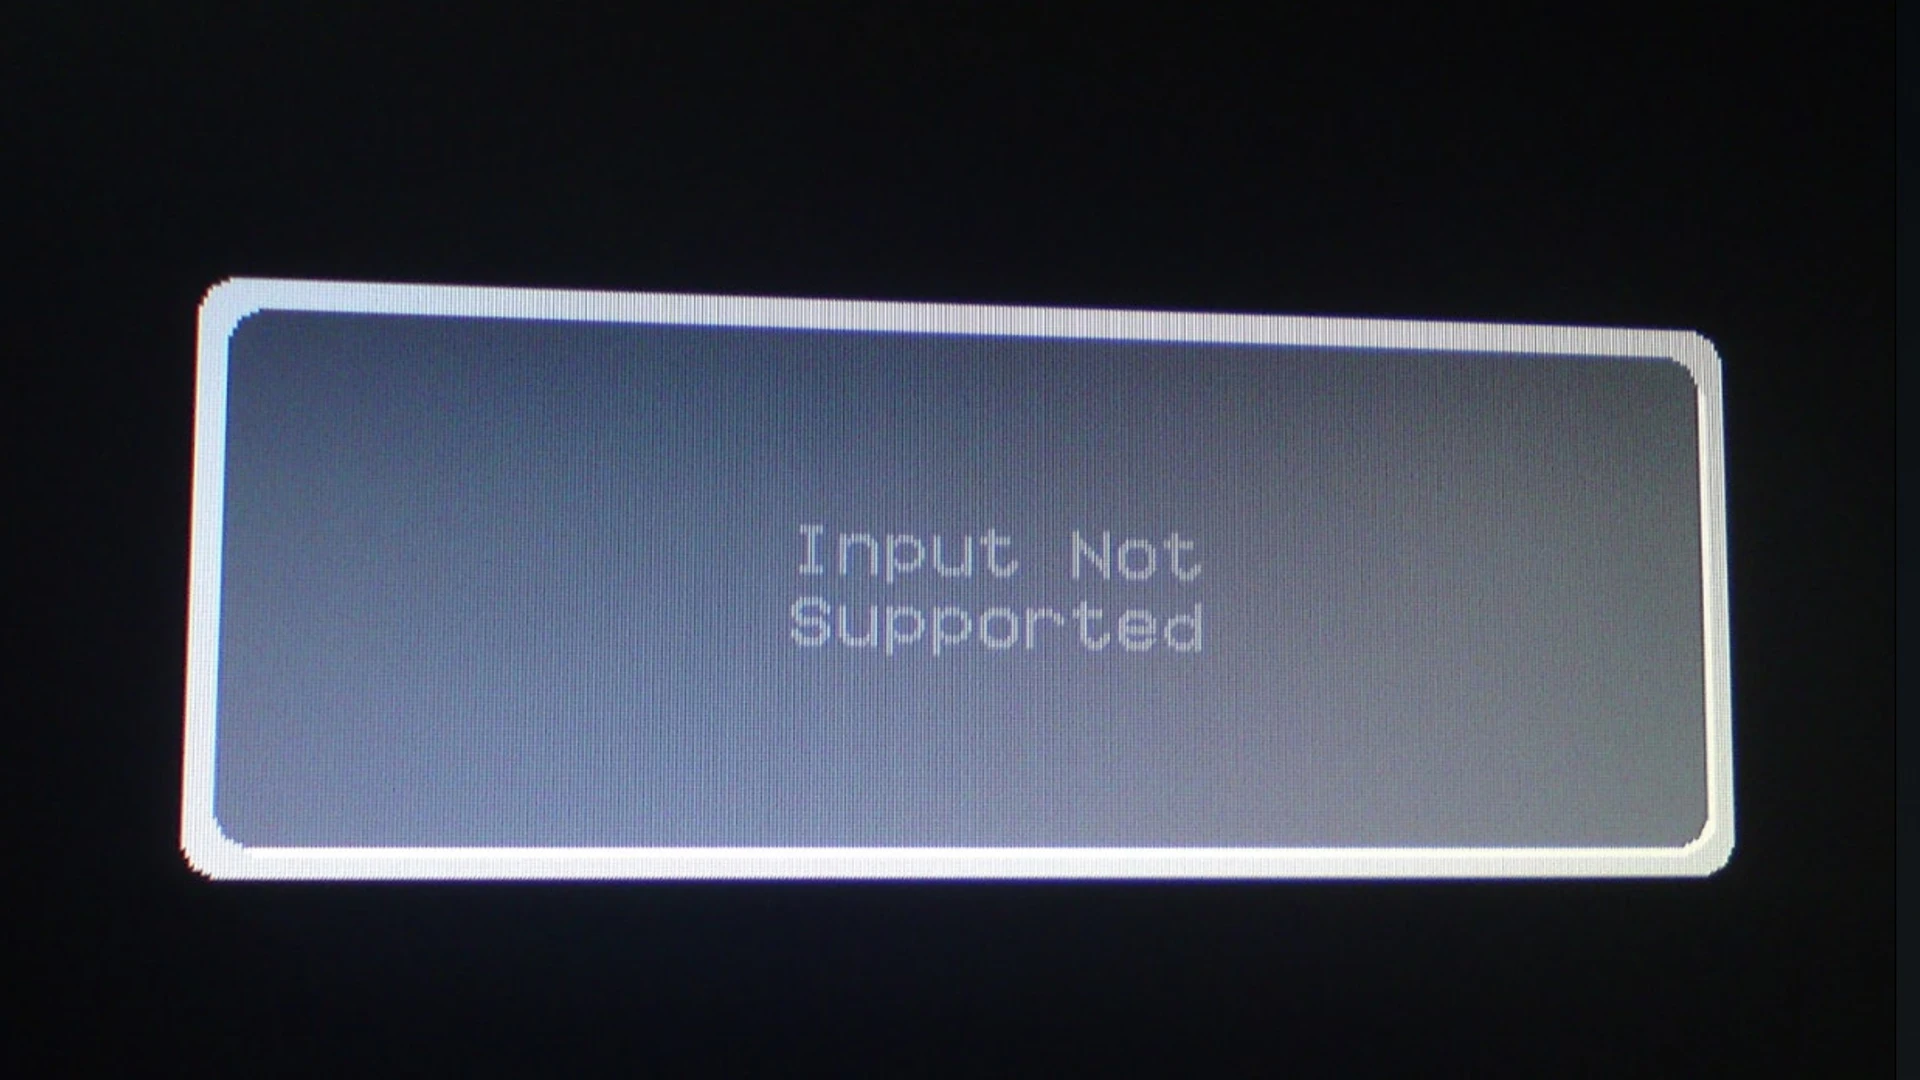 Fix Input Not Supported Monitor error on Windows PC